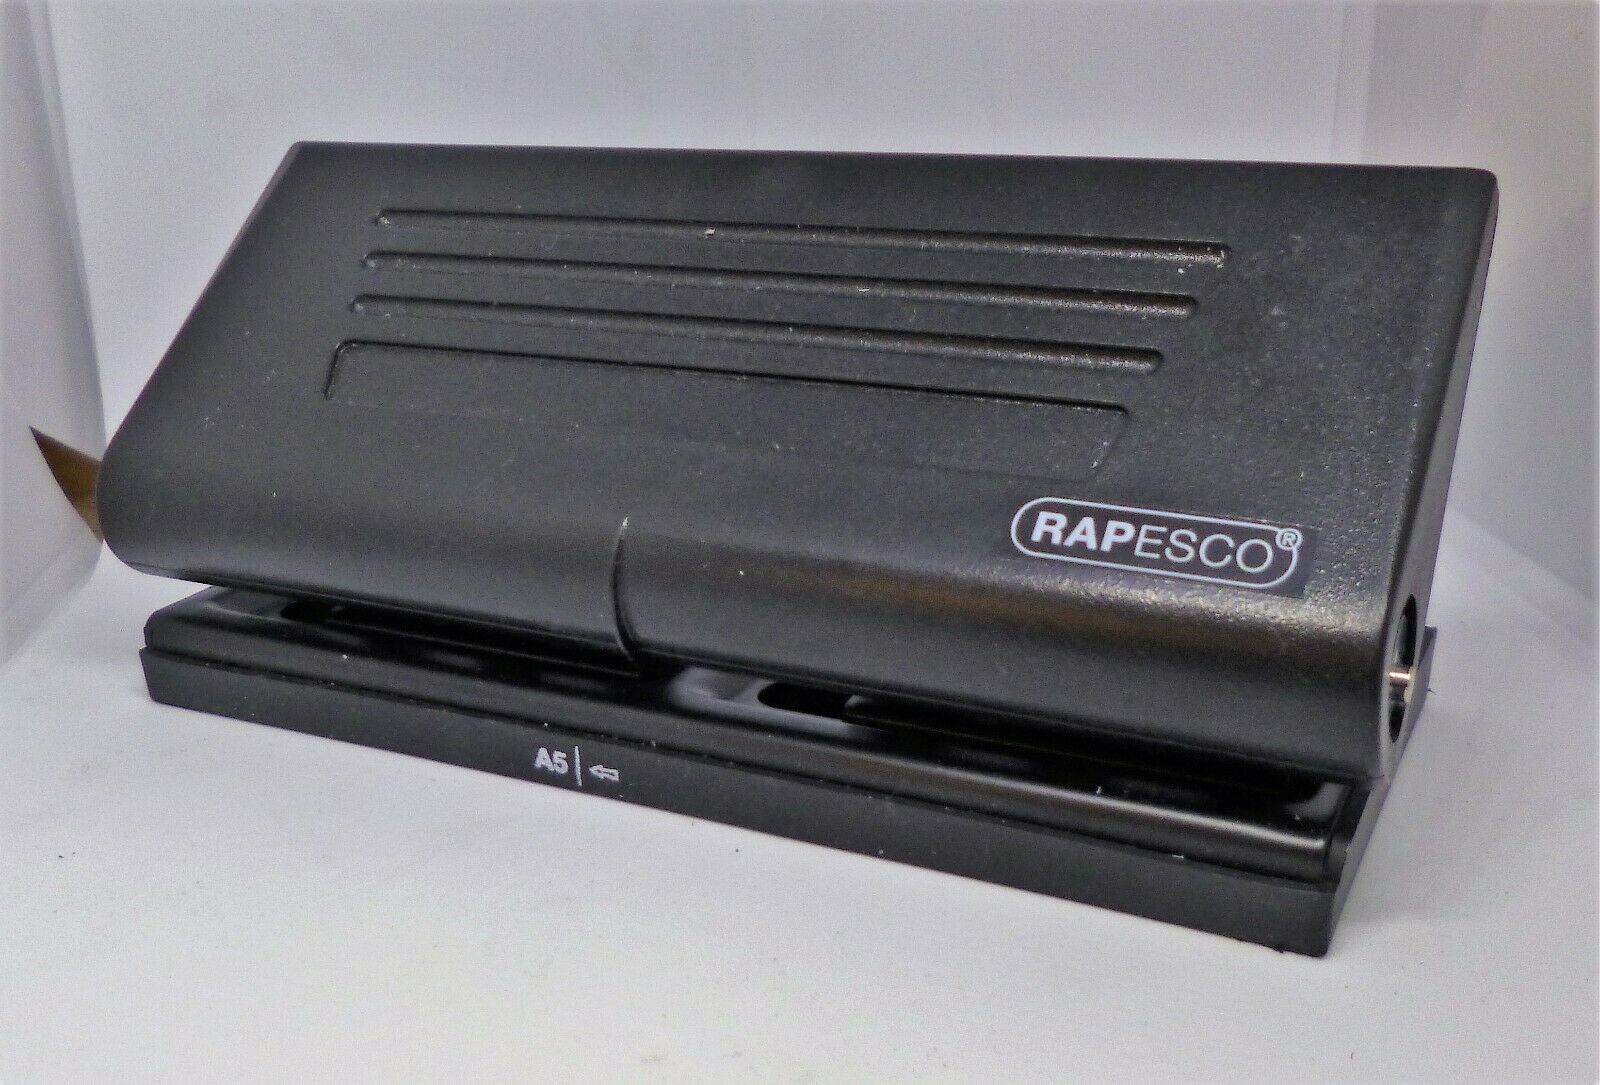 Rapesco Brand All Metal 6-hole Punch Paper Puncher For A5